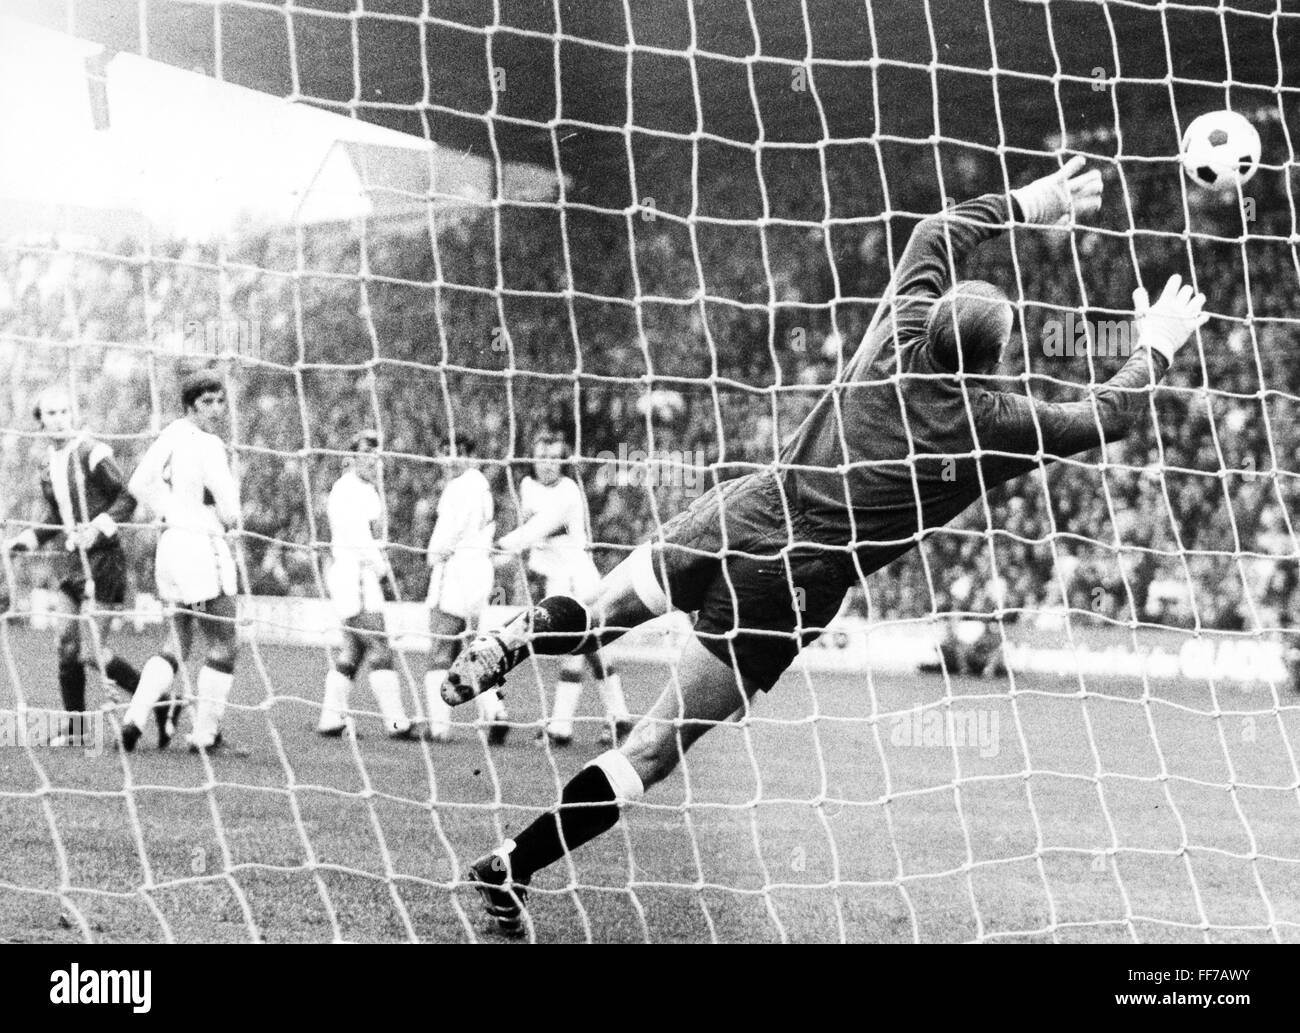 sports,football,game,Germany,national league,season 1970 / 1971,13th match day,game Borussia Moenchengladbach versus VFB Stuttgart(4:1),goal to the 1:0 after free kick of Guenter Netzer,unsuccessful save of goal keeper Gerhard Heinze,Boekelberg stadion,Moenchengladbach,31.10.1970,goal,goals,goal net,net,nets,football player,football players,footballer,footballers,kicker,action,act,actions,acts,jumping,jumps,jump,ball,sports stadium,sports stadiums,football stadium,soccer stadium,football stadiums,soccer stadiums,Saturday,a,Additional-Rights-Clearences-Not Available Stock Photo